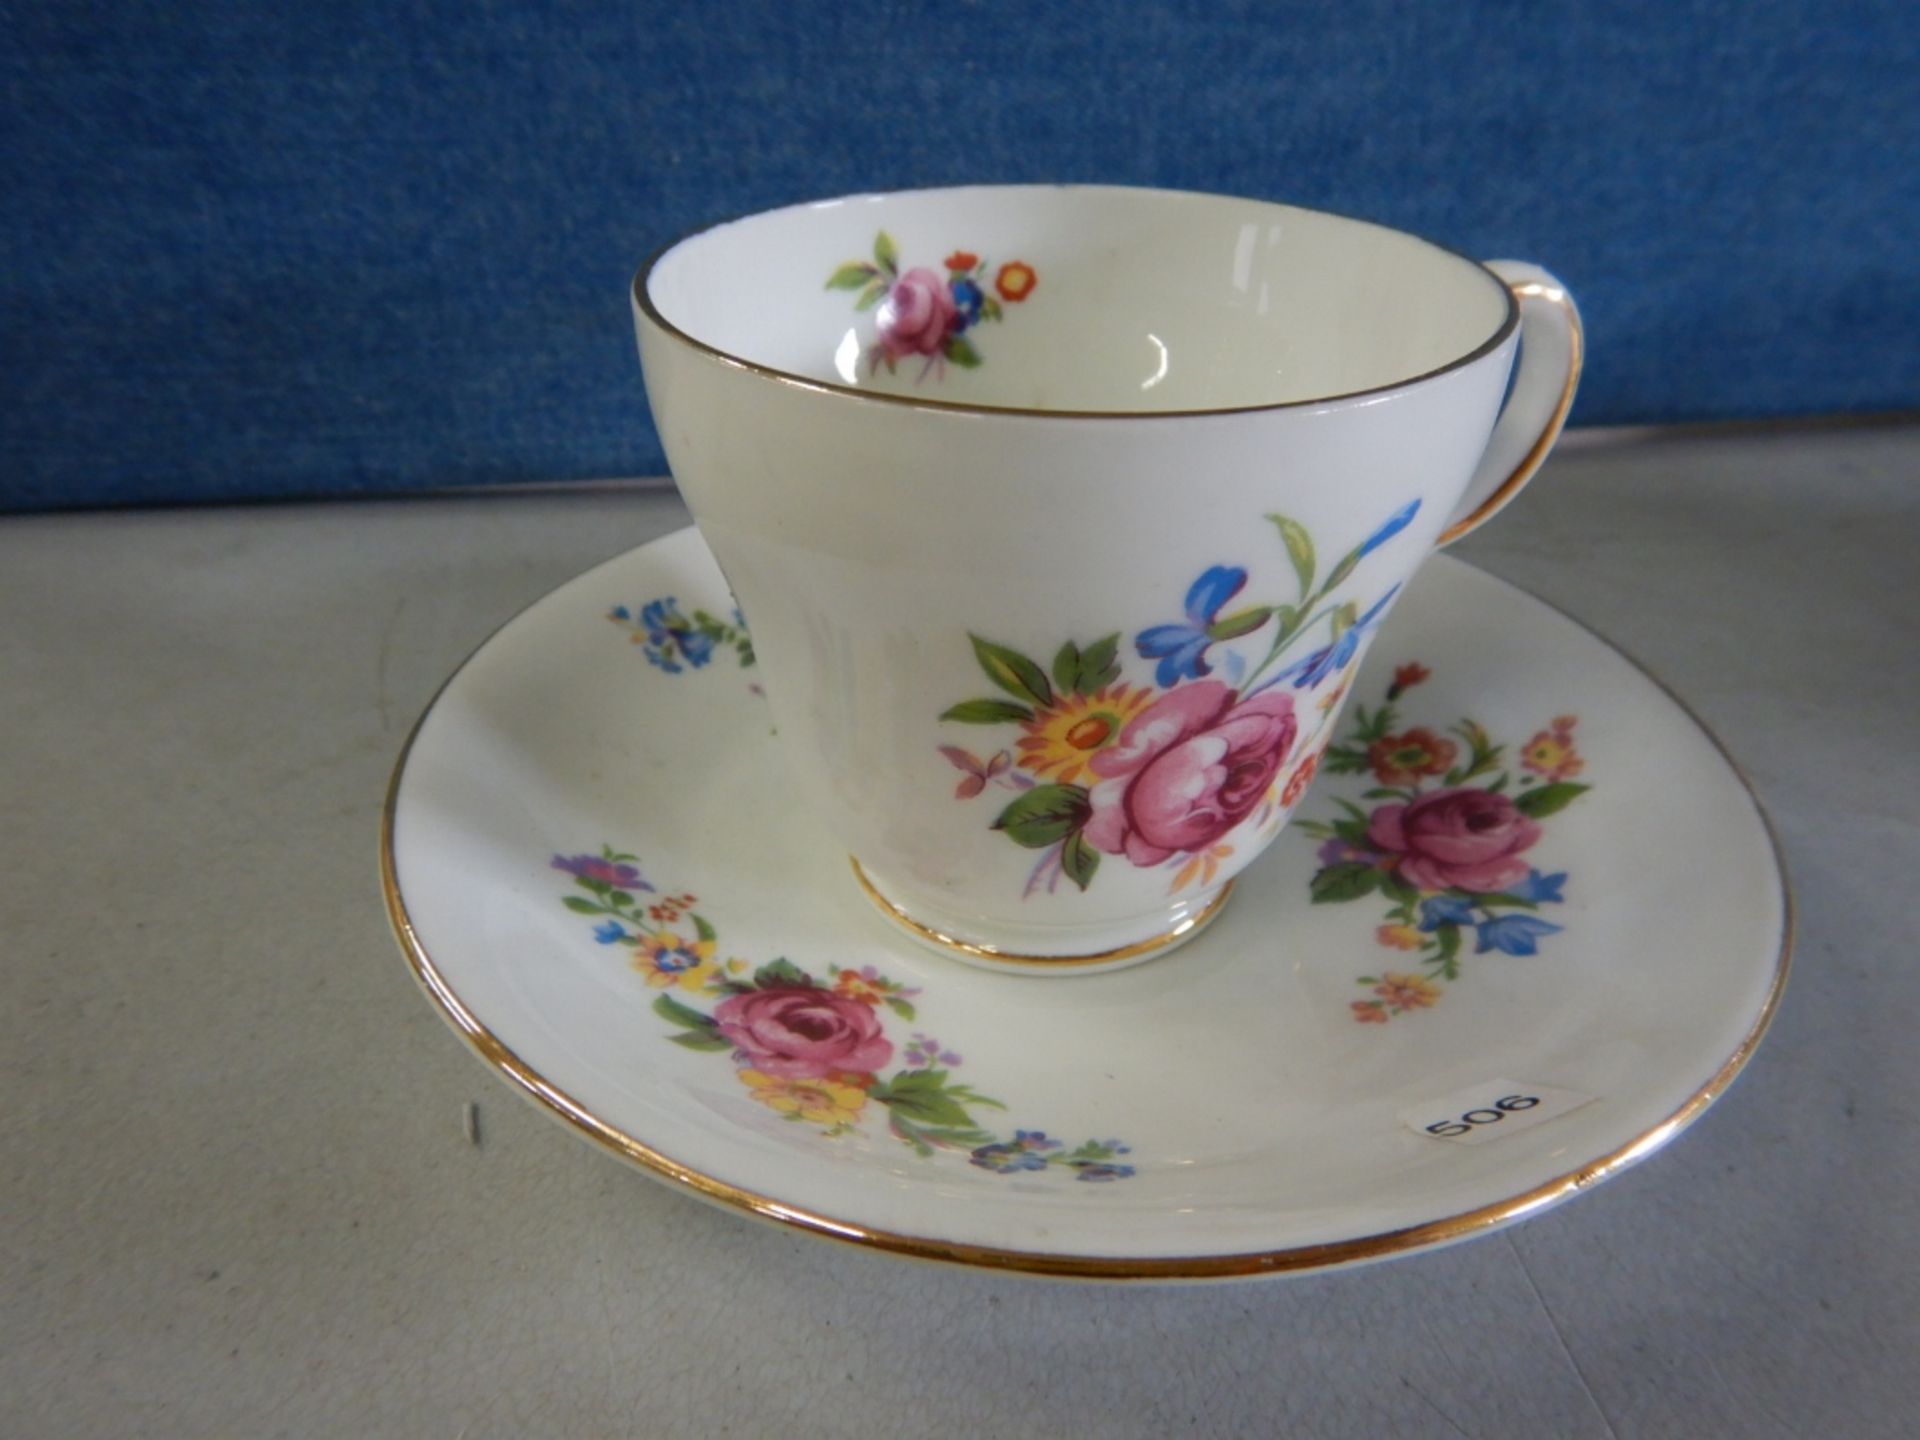 ANTIQUE TEACUPS & SAUCERS - MADE IN ENGLAND - LOT OF 2 - FINE BONE CHINA EST. 1875 "STANLEY" - # - Image 3 of 12